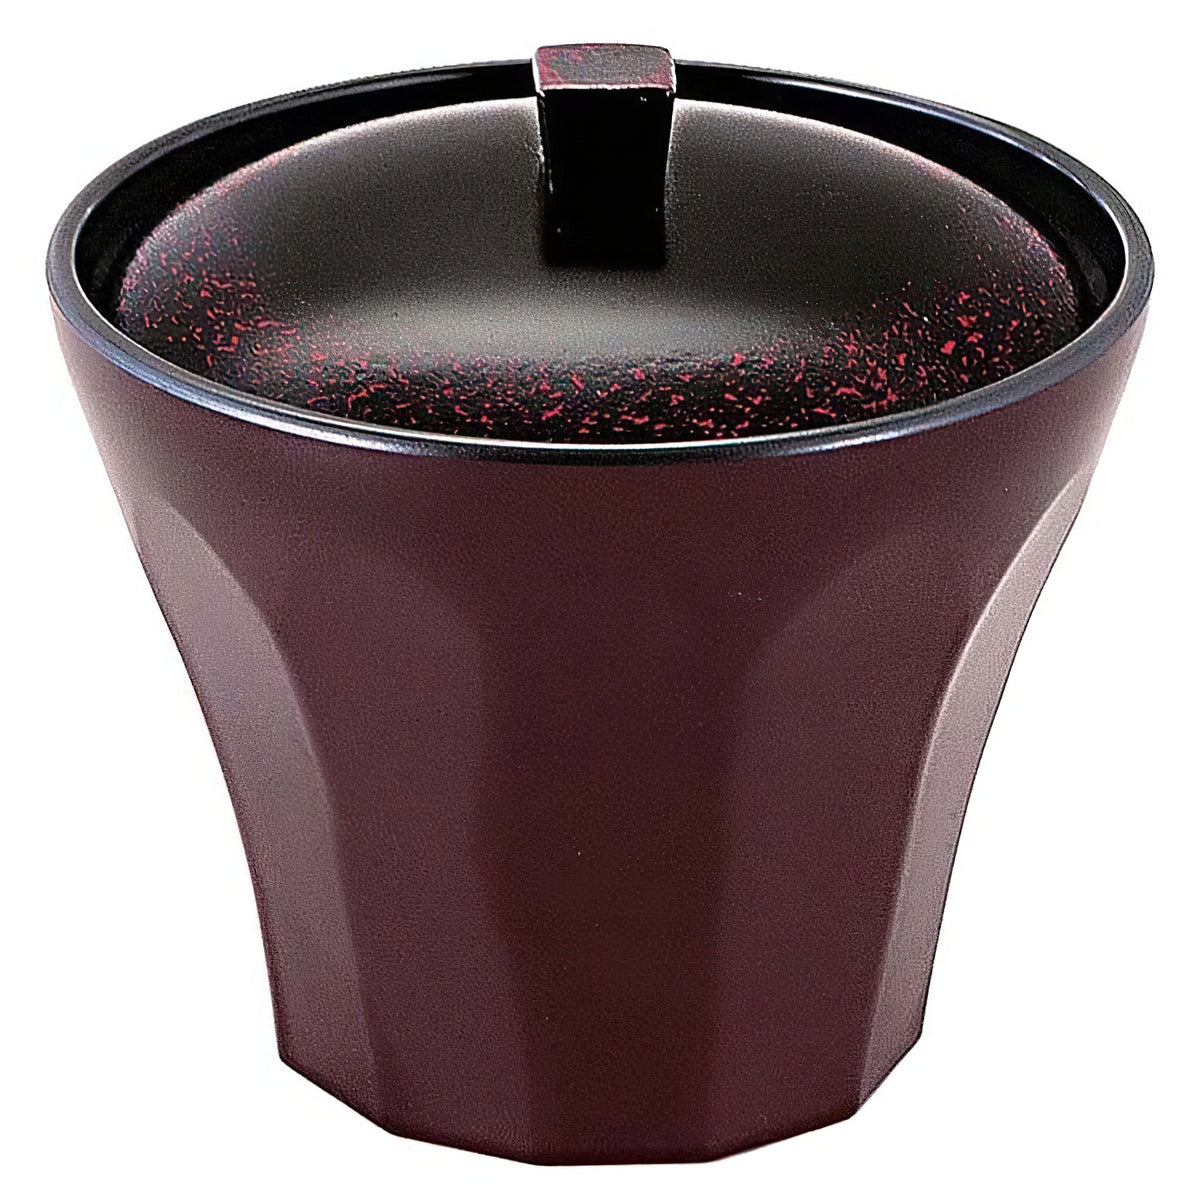 Fukui Craft Heat-Resistant ABS Resin Soup Bowl with Lid